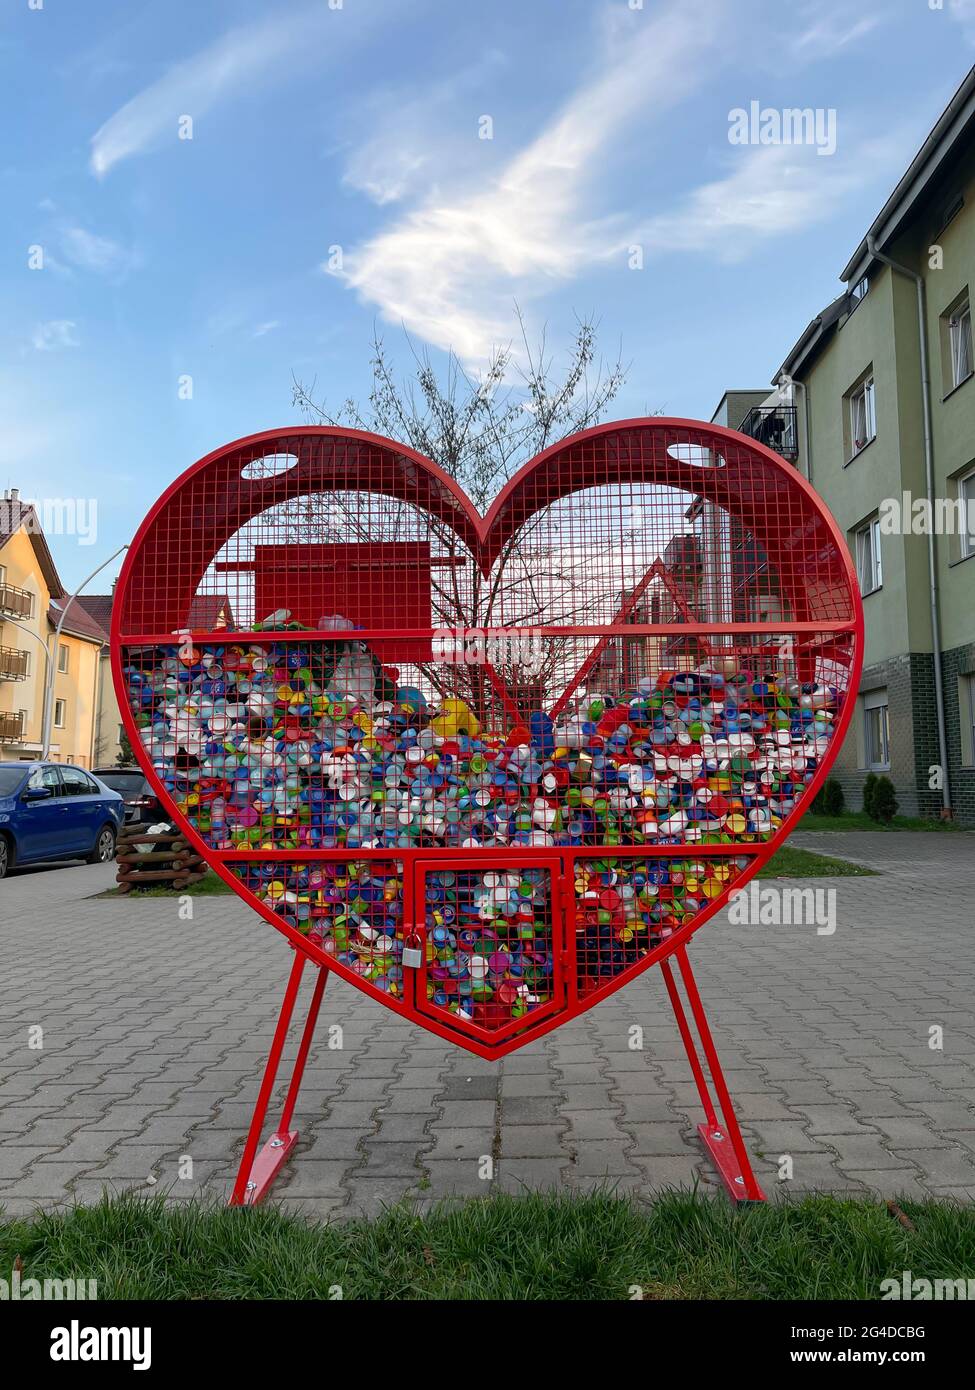 Wroclaw, Poland March 31, 2021: Place for collecting colorful plastic bottle  caps for recycling and charity. Heart shaped metal container Stock Photo -  Alamy